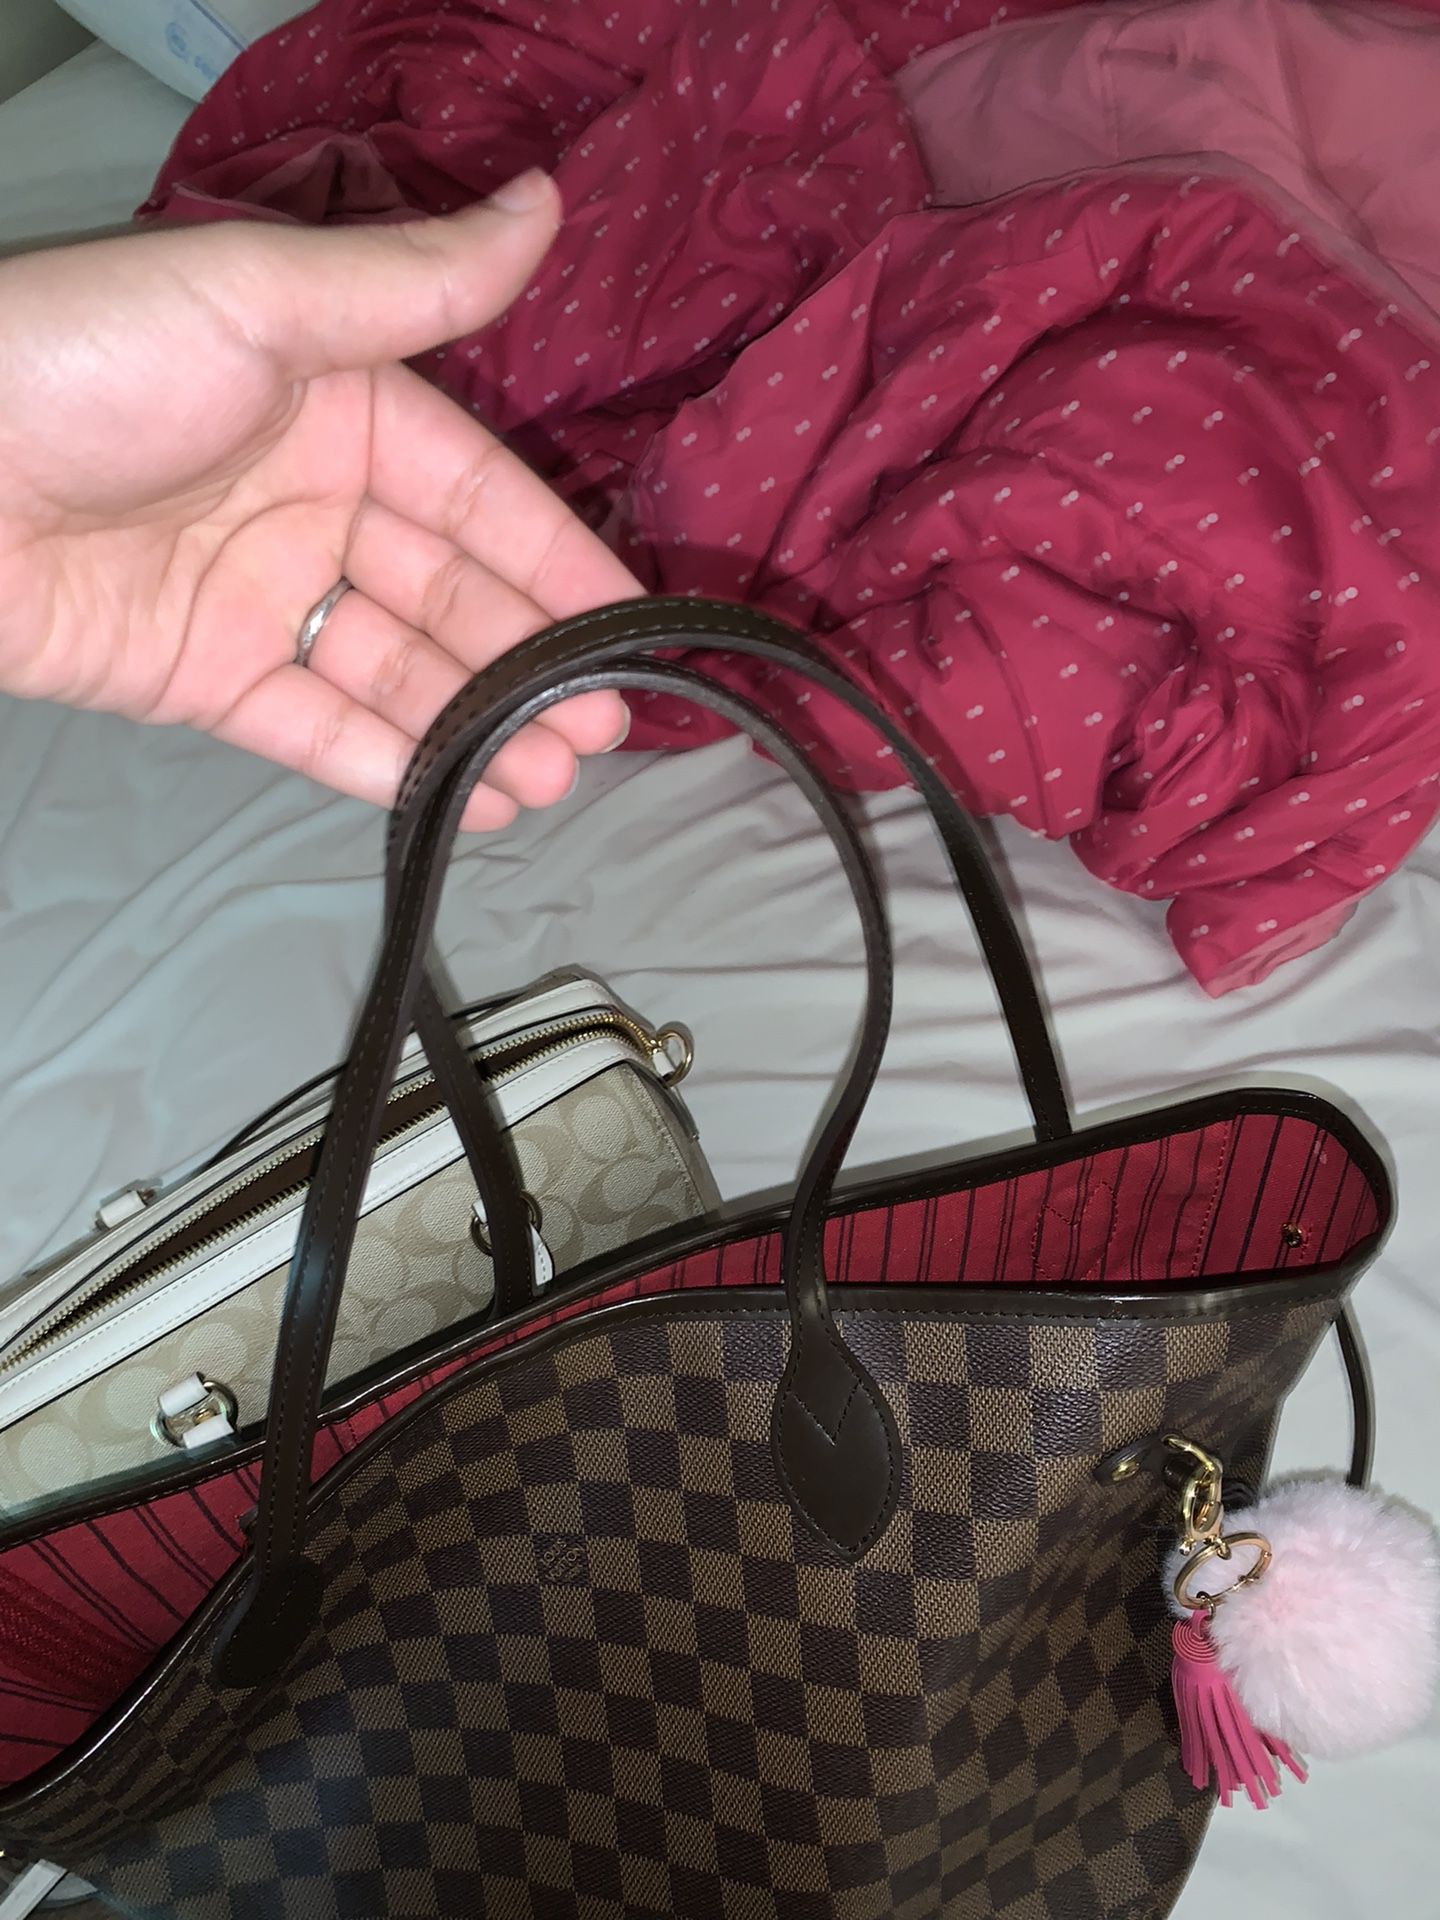 Louis Vuitton Monogram Mertis for Sale in Sims, NC - OfferUp